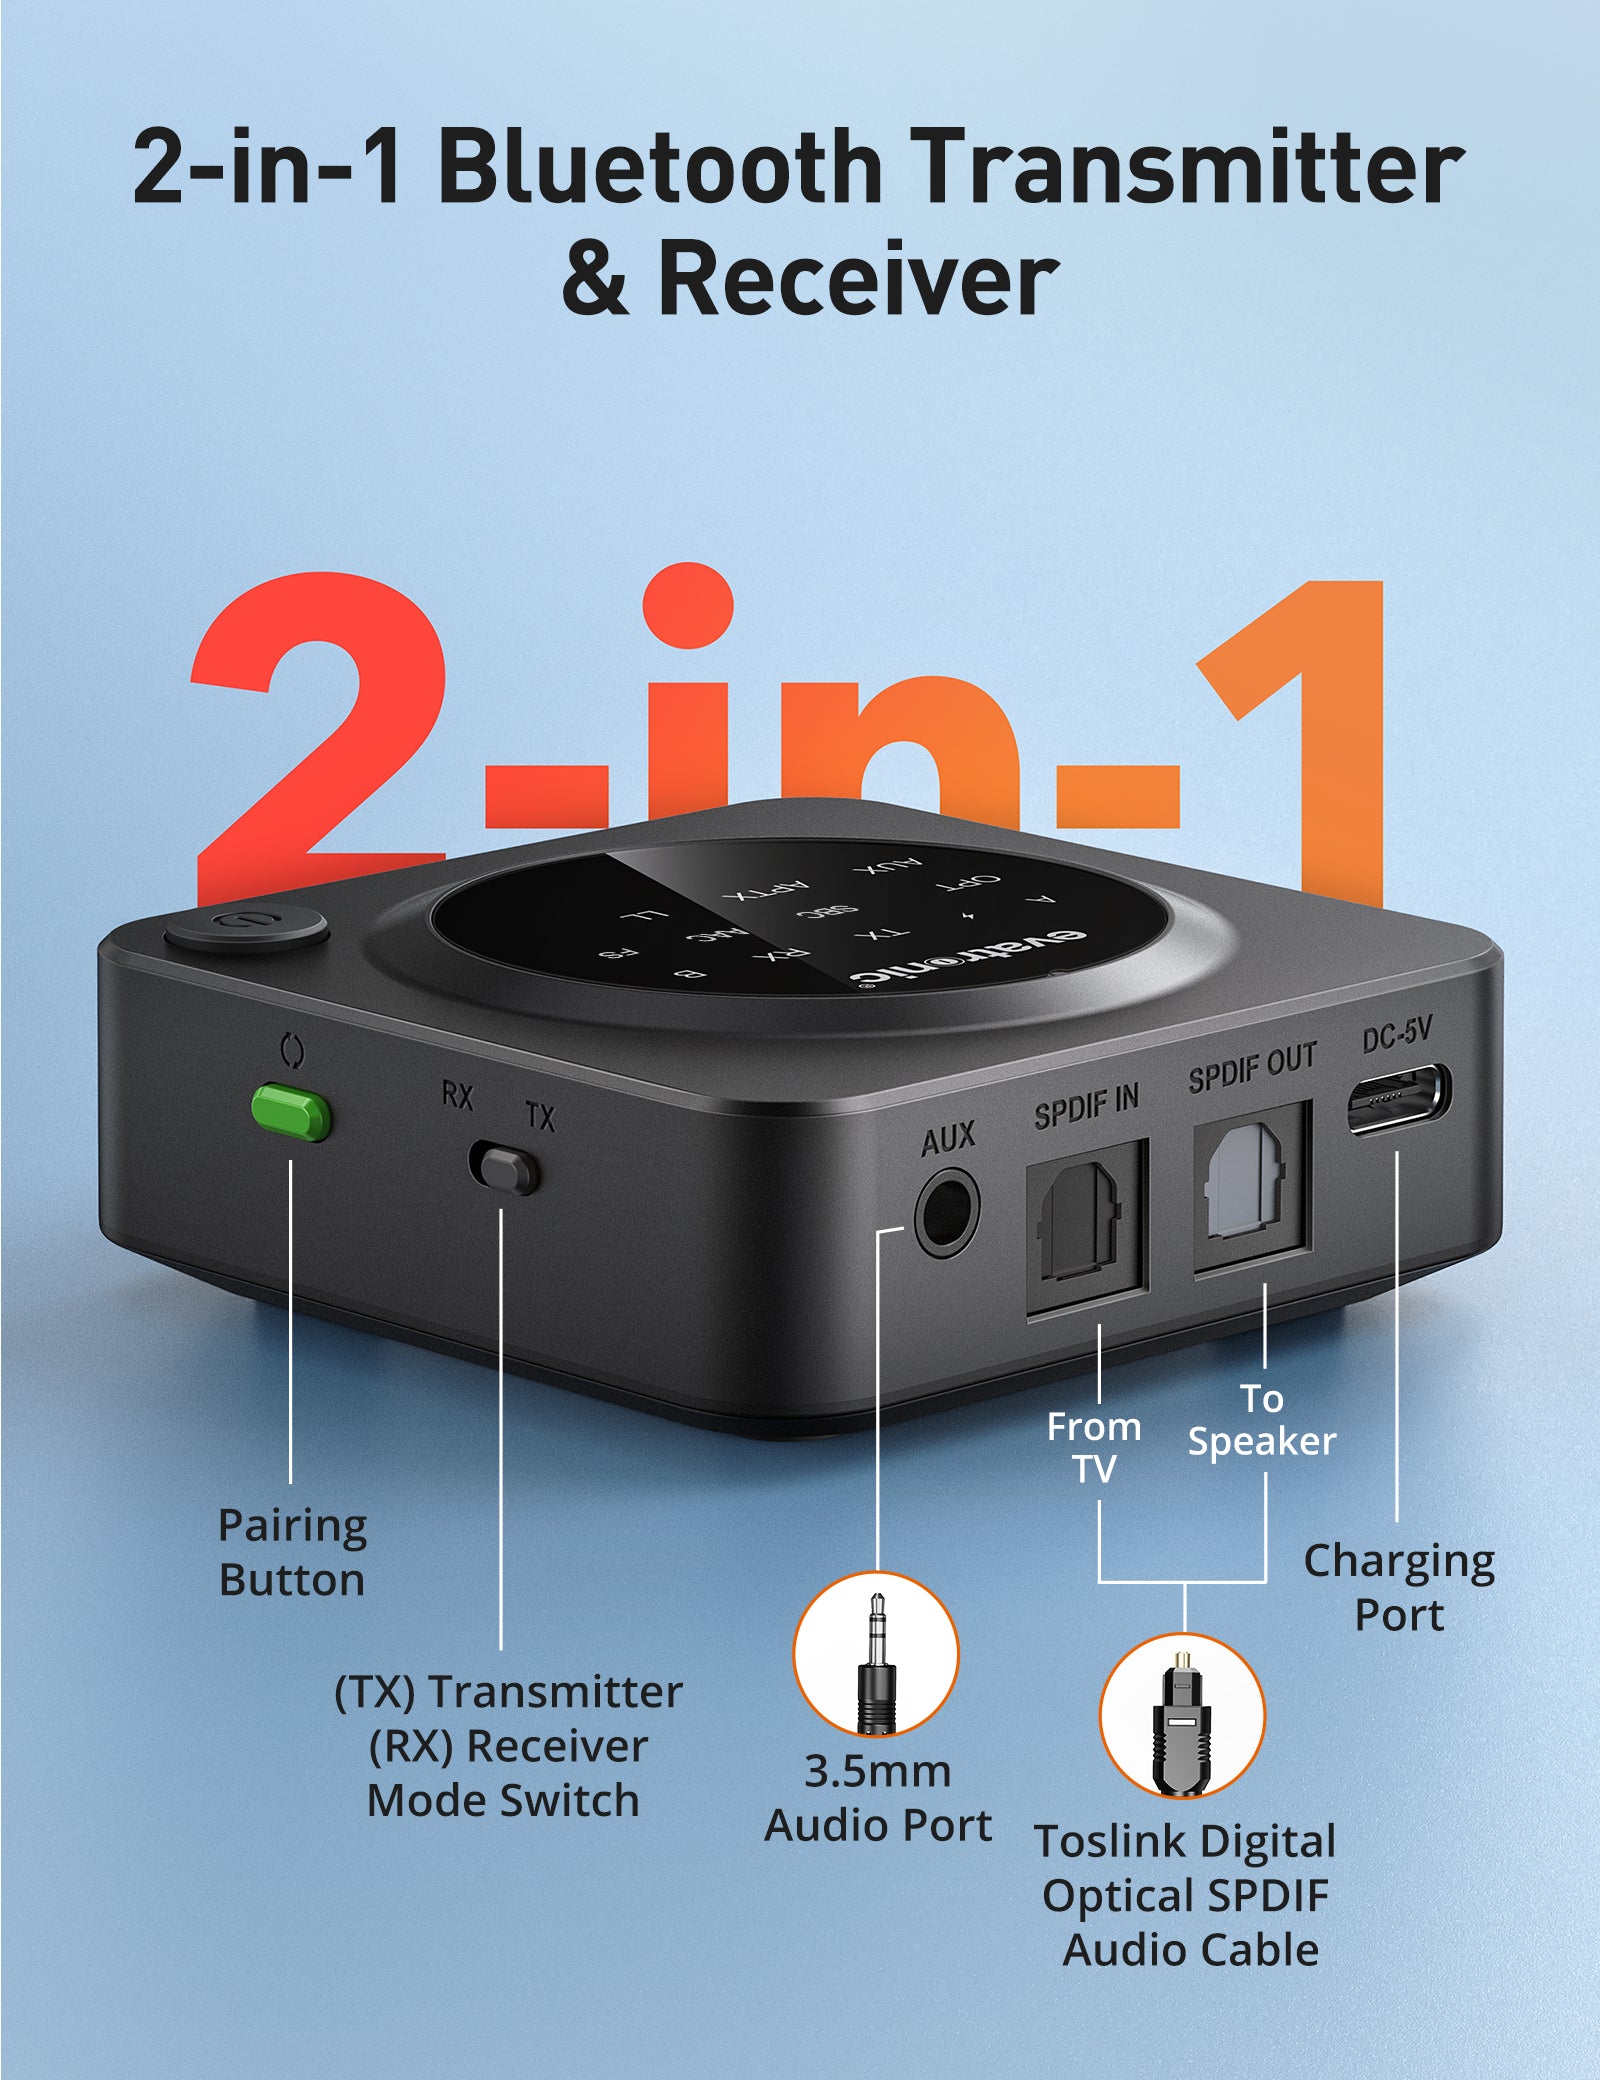 Evatronic BA007 Bluetooth 5.0 Transmitter Receiver for TV/PC